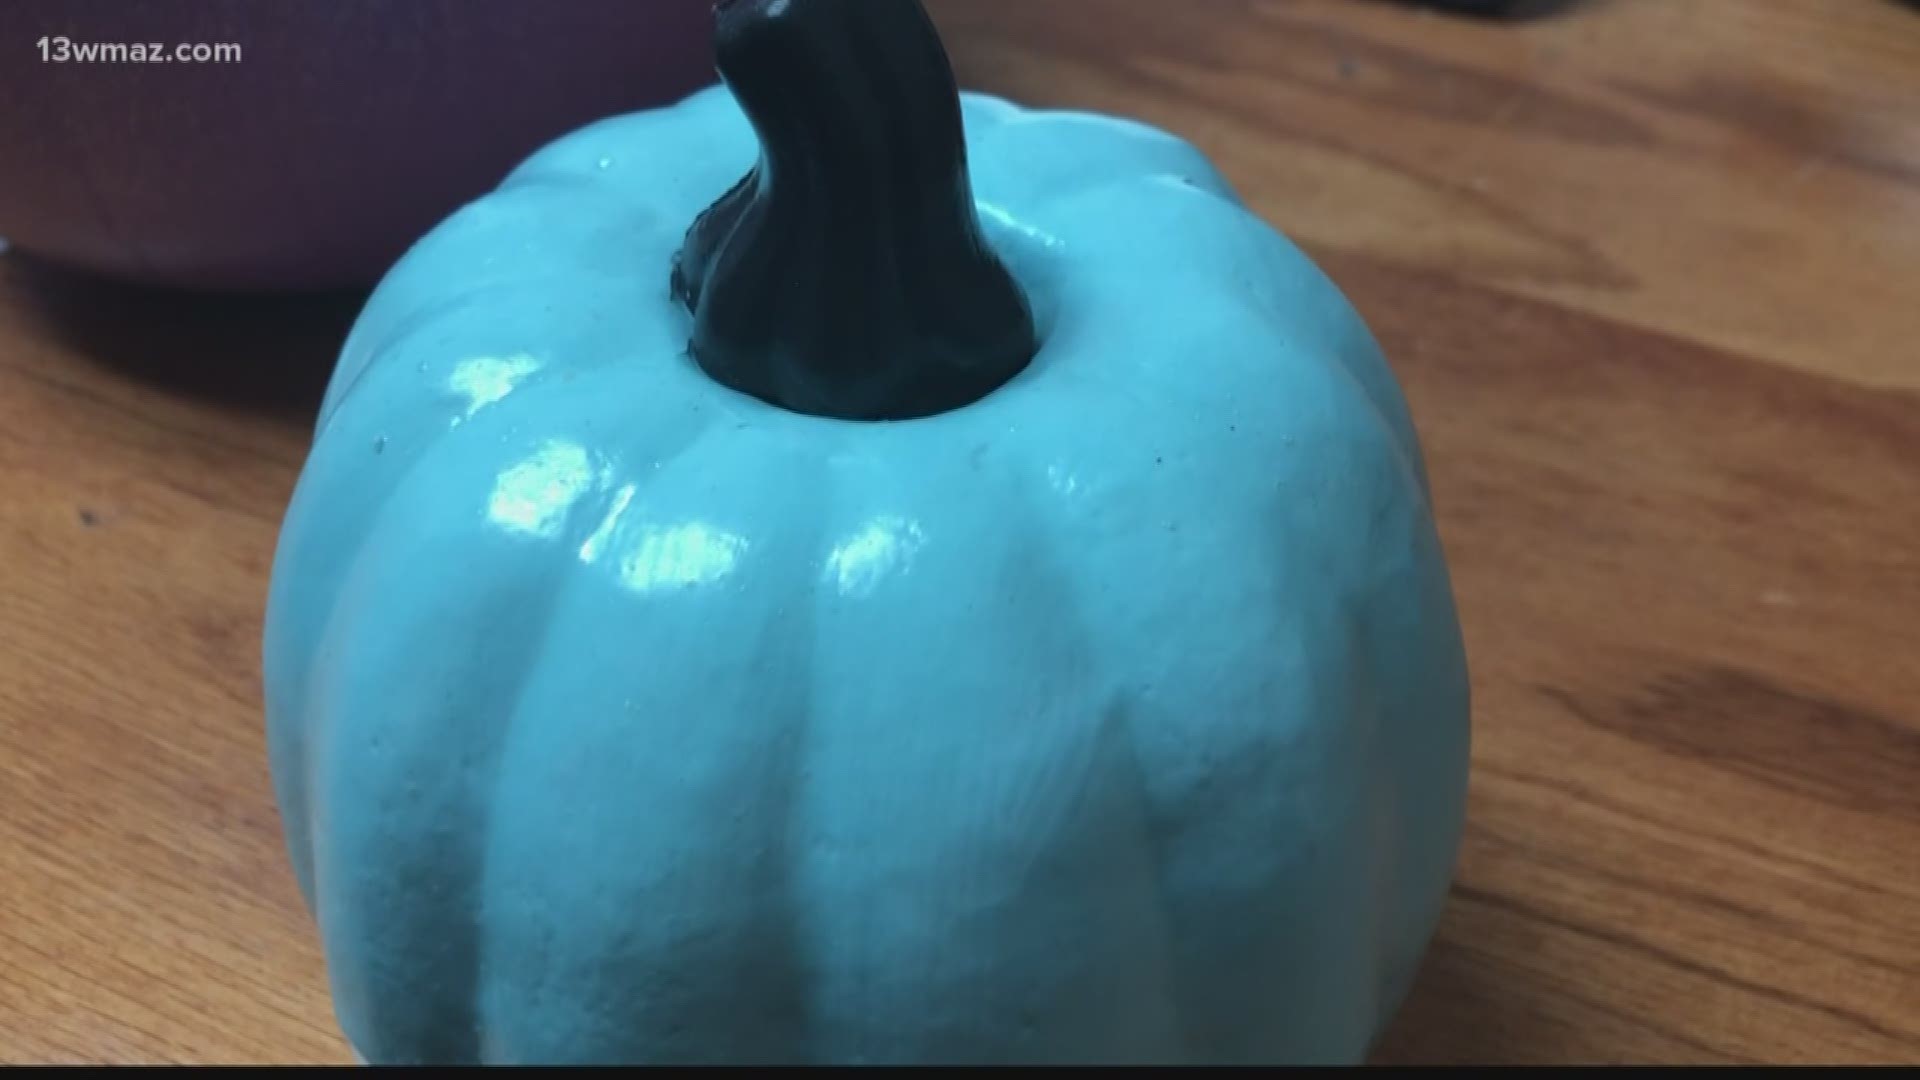 Junior Journalist Brooklyn Williams tells you about the teal pumpkin project that works to make Halloween night a little less spooky.